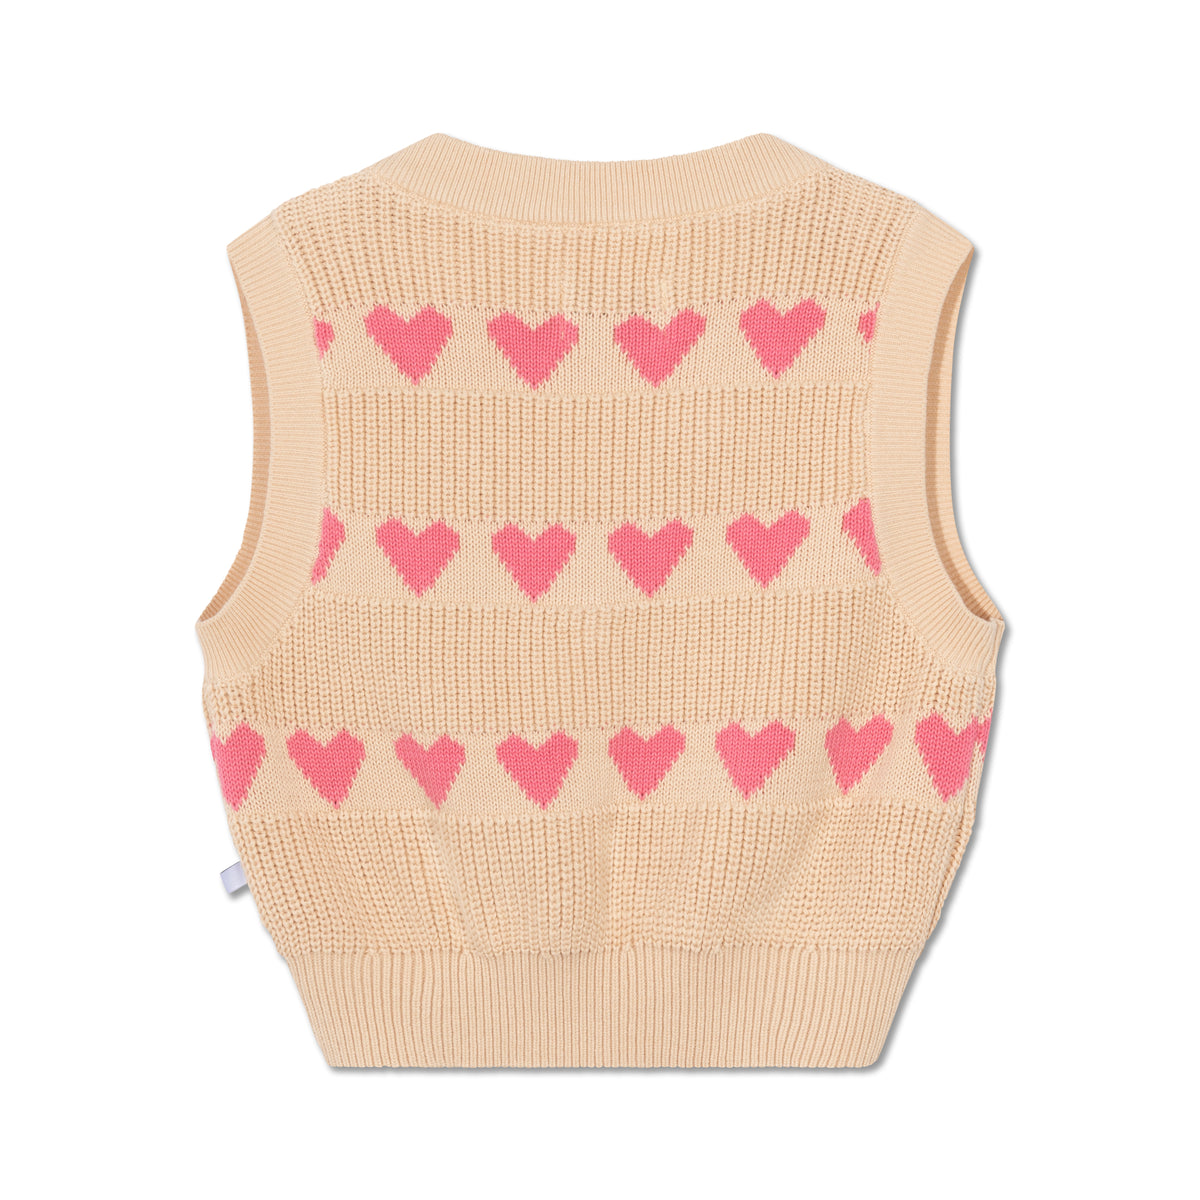 Knit spencer pink hearts